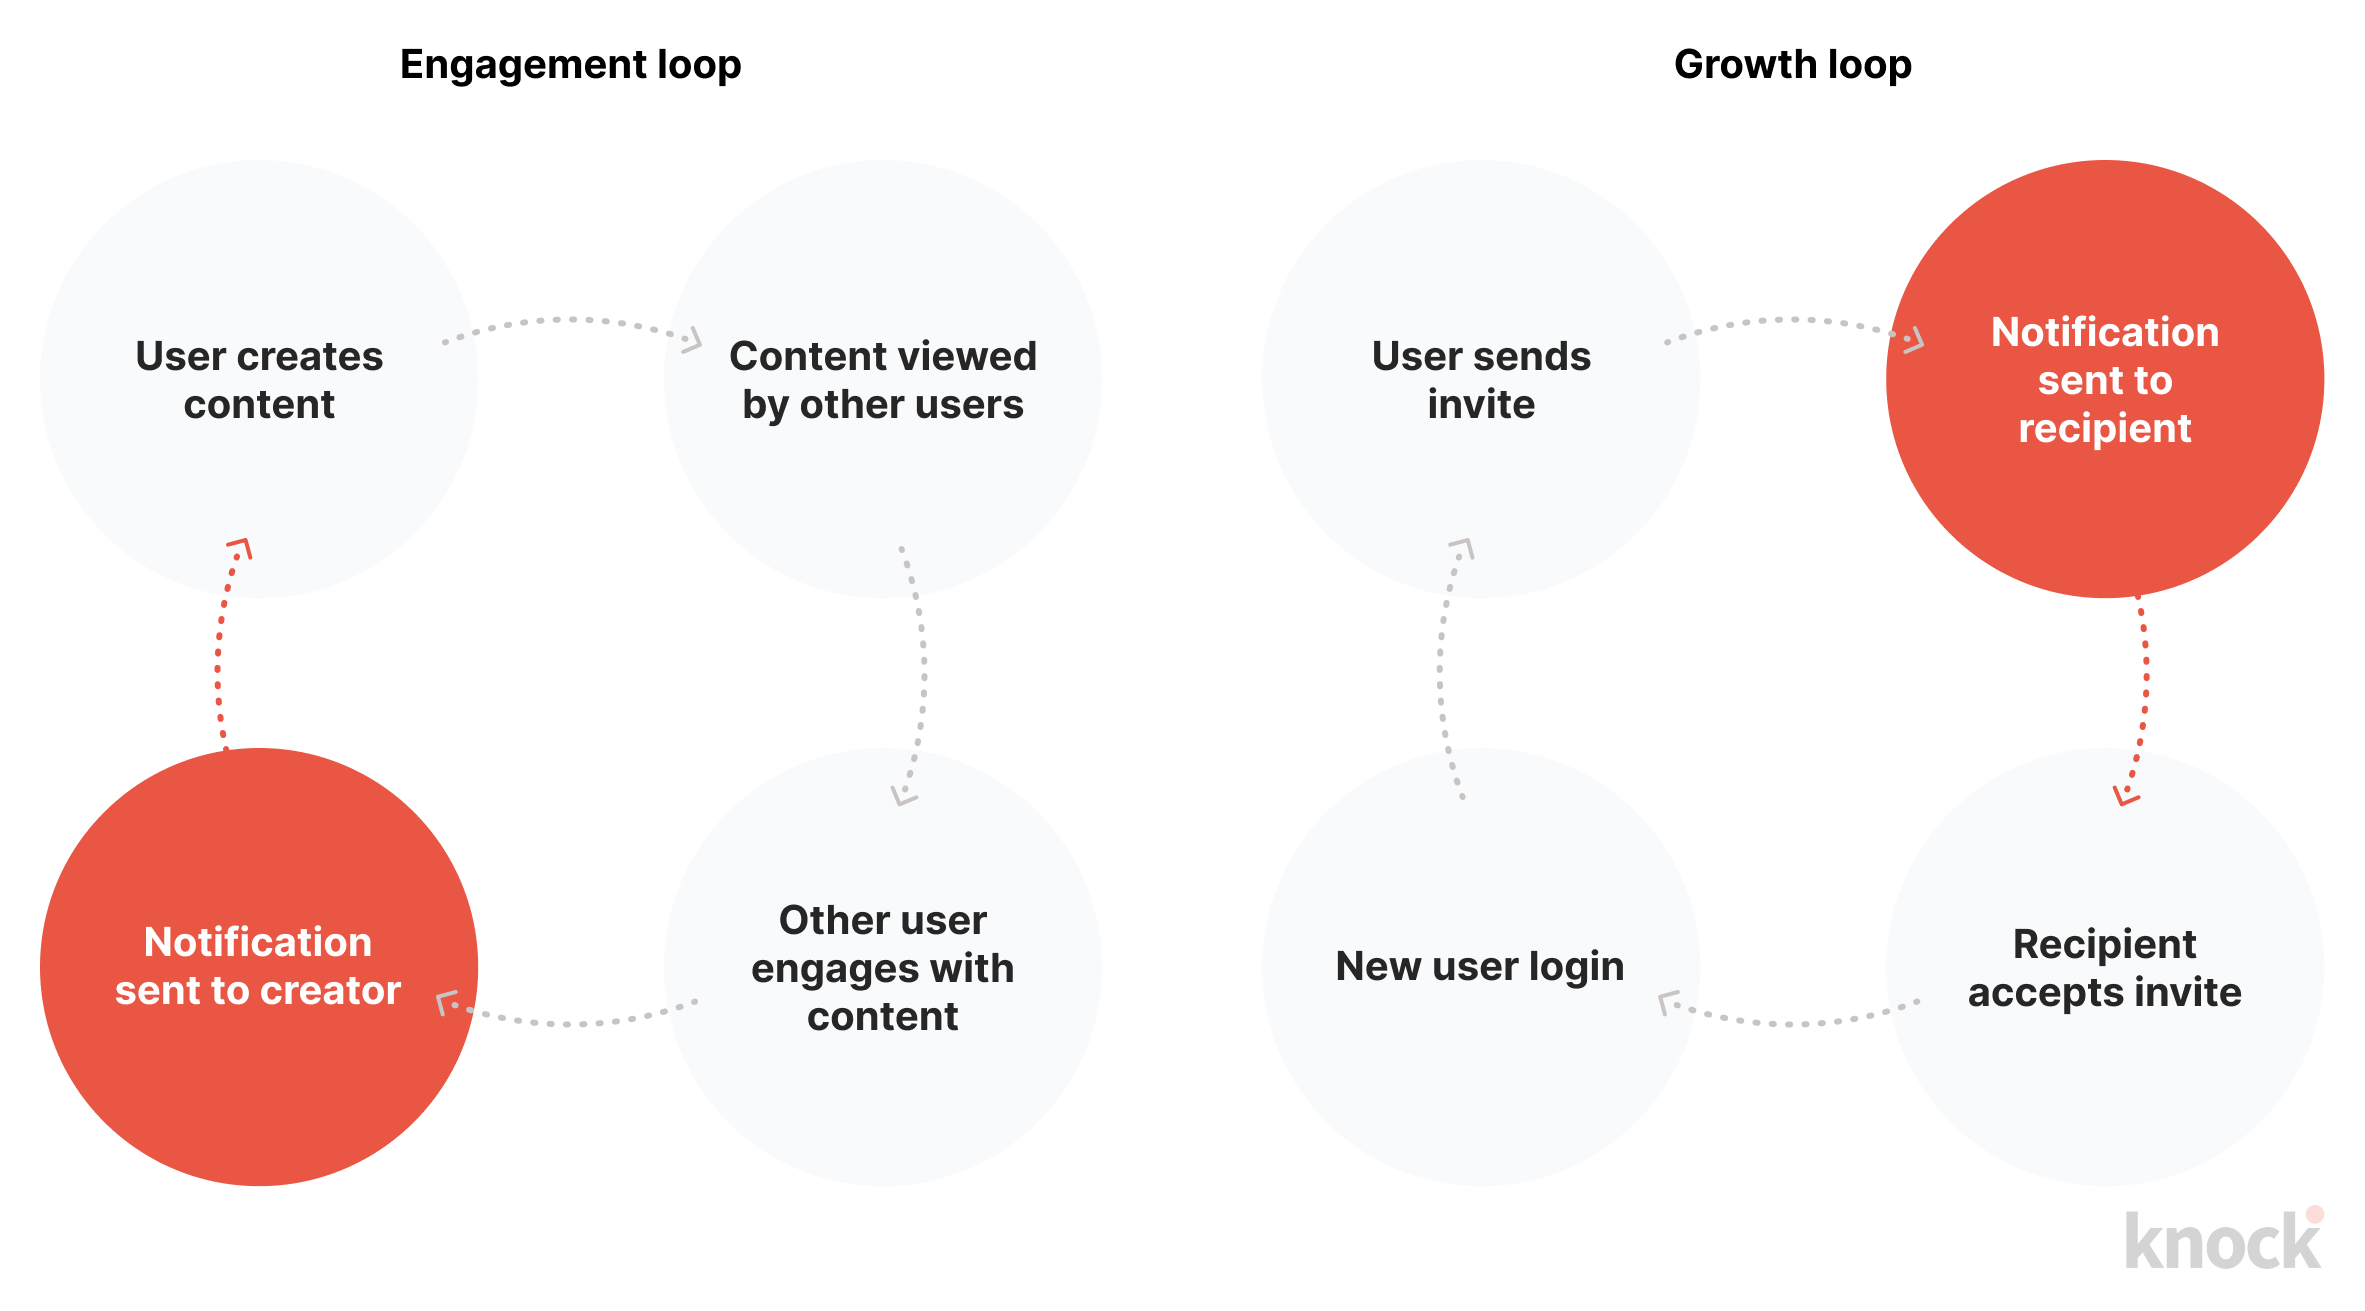 The role that notifications play in engagement loops